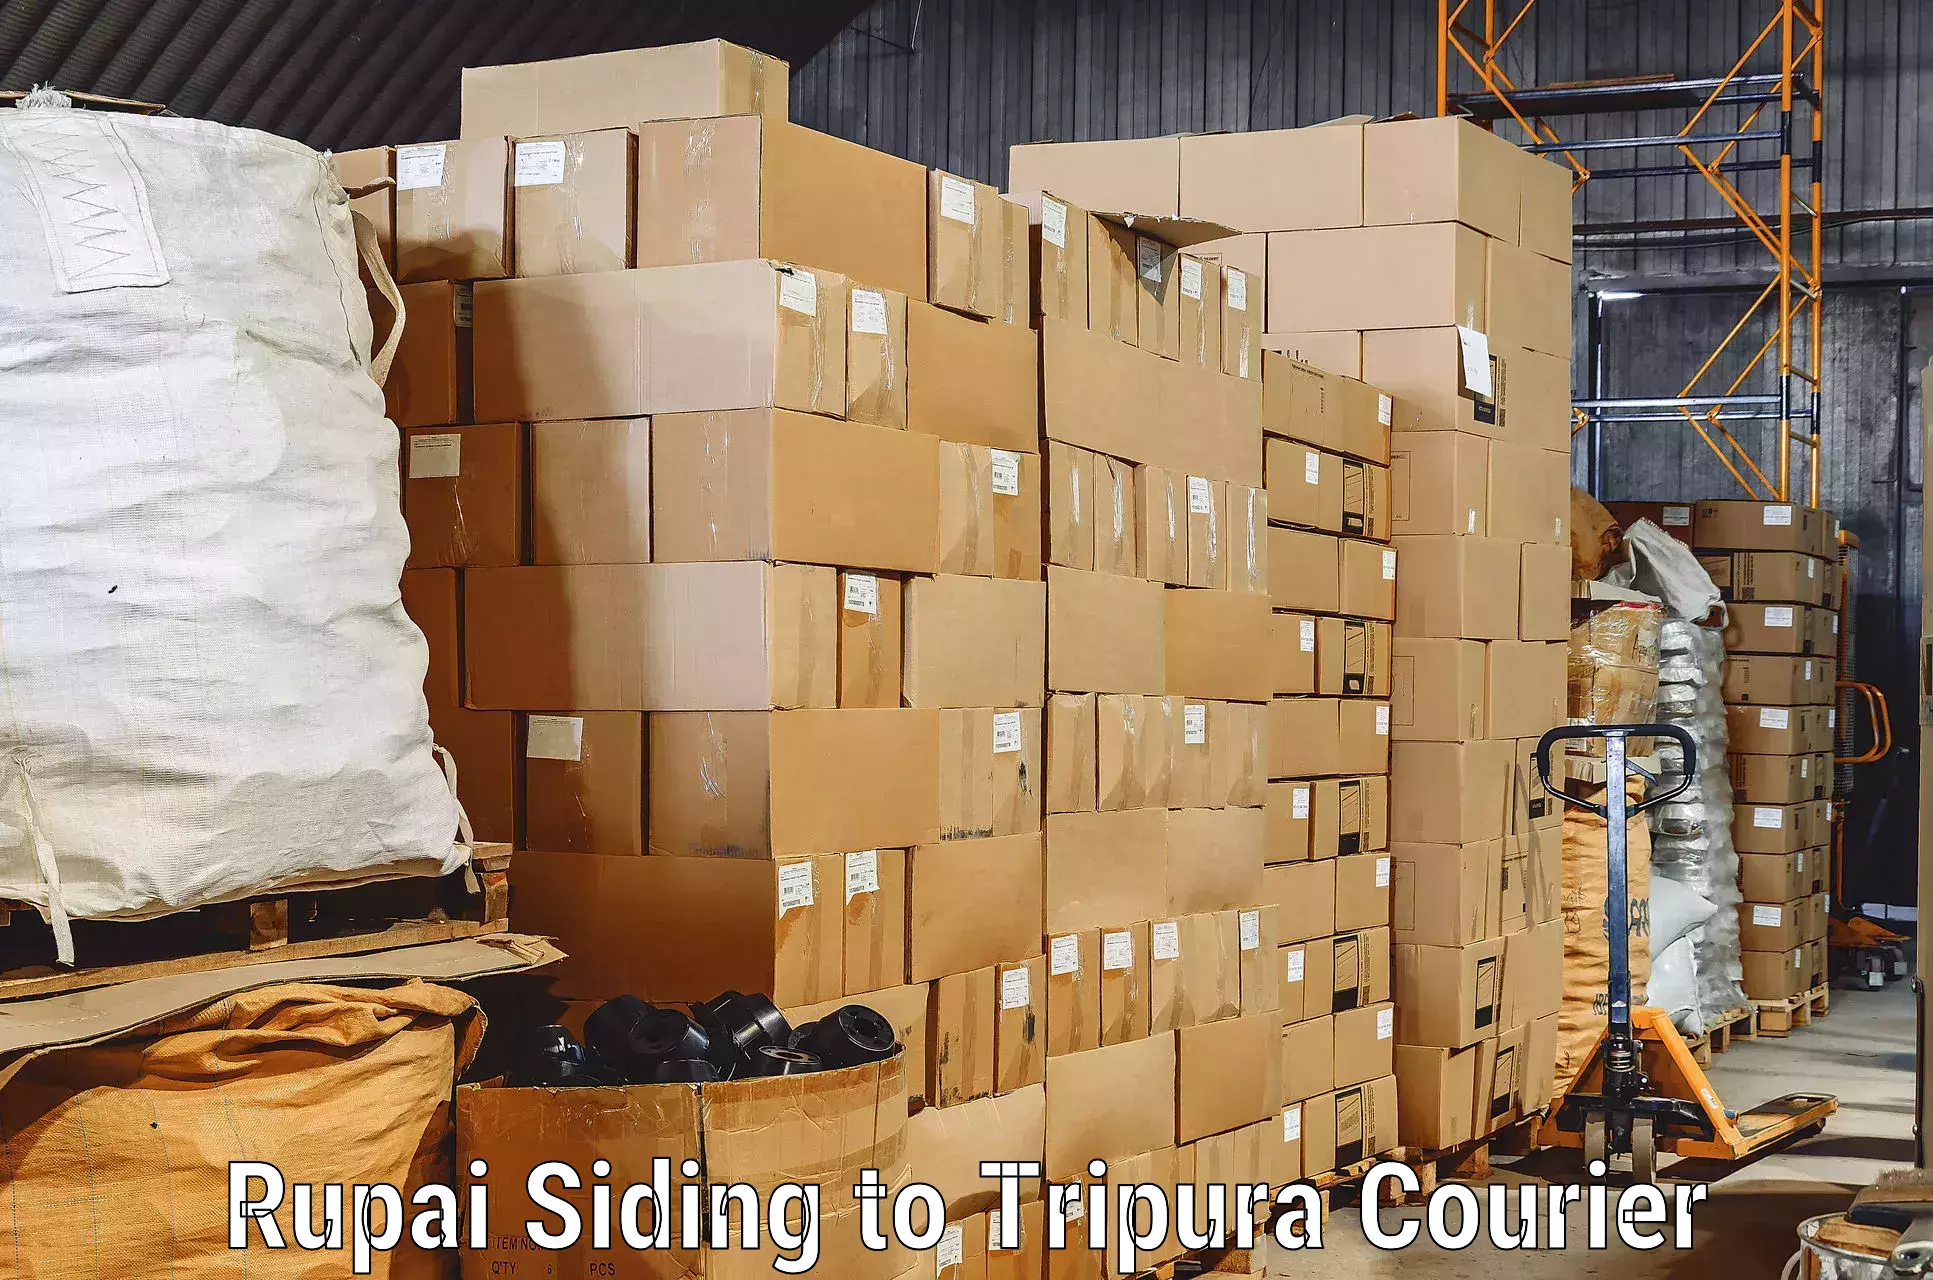 Furniture relocation experts Rupai Siding to North Tripura